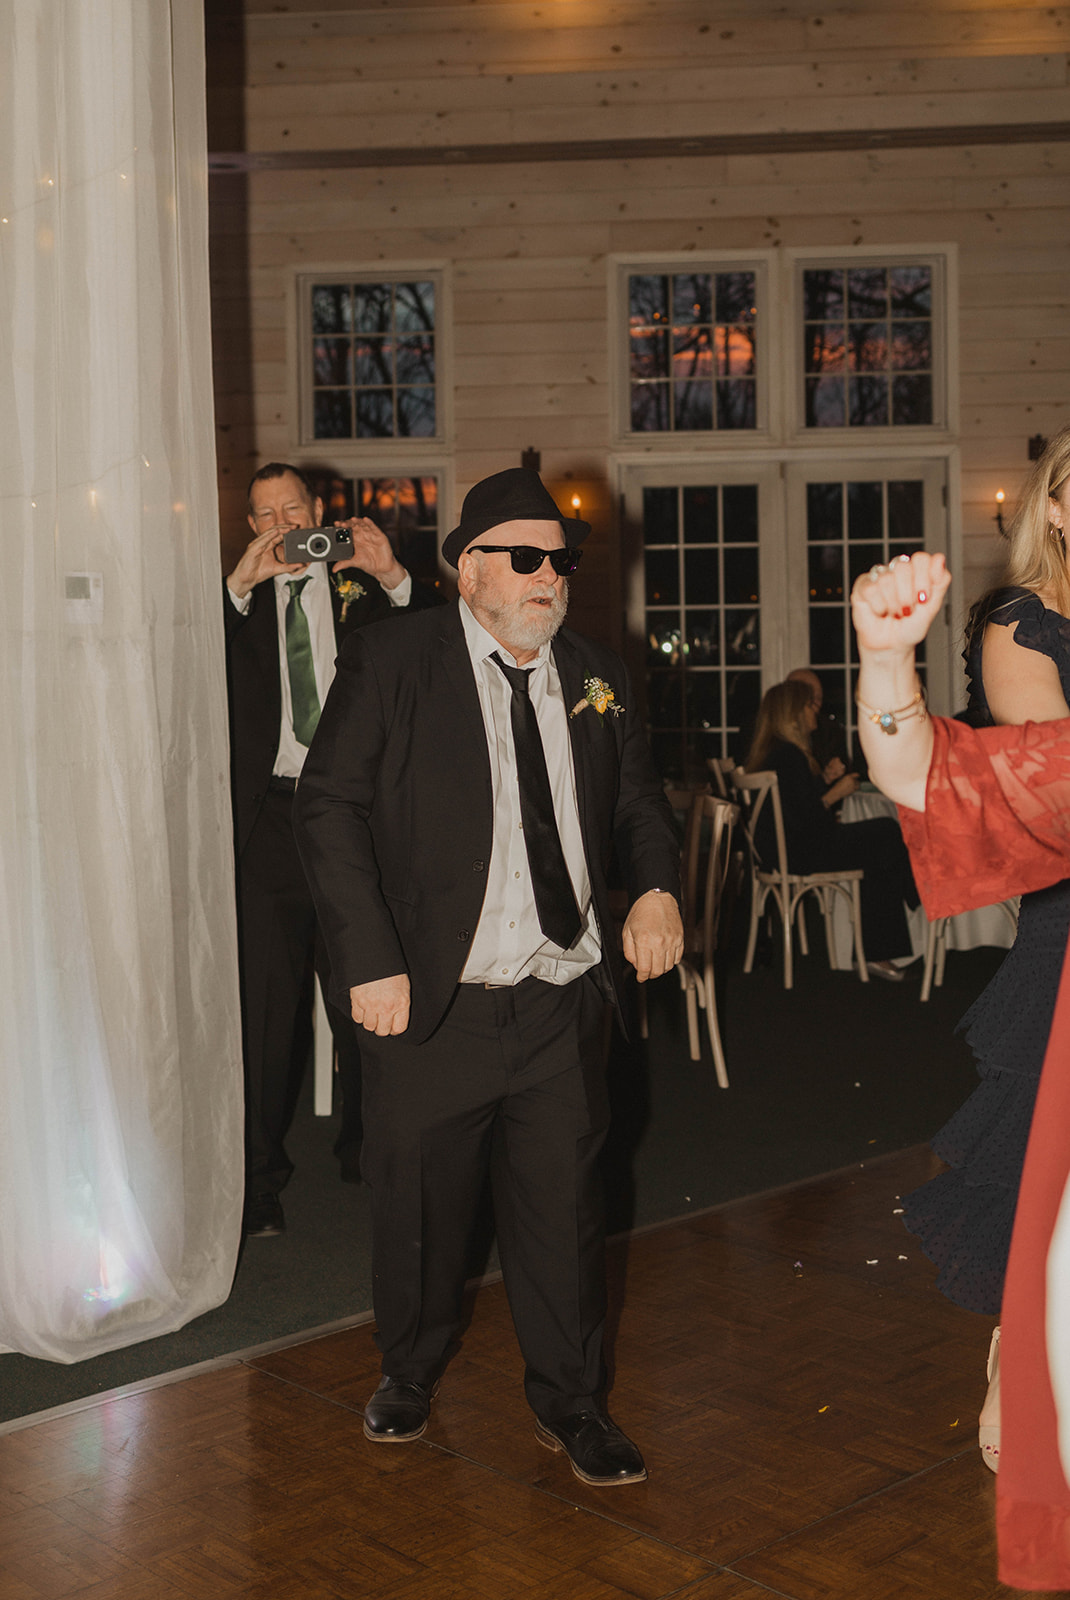 Wedding guests enter the dance floor with new sunglasses